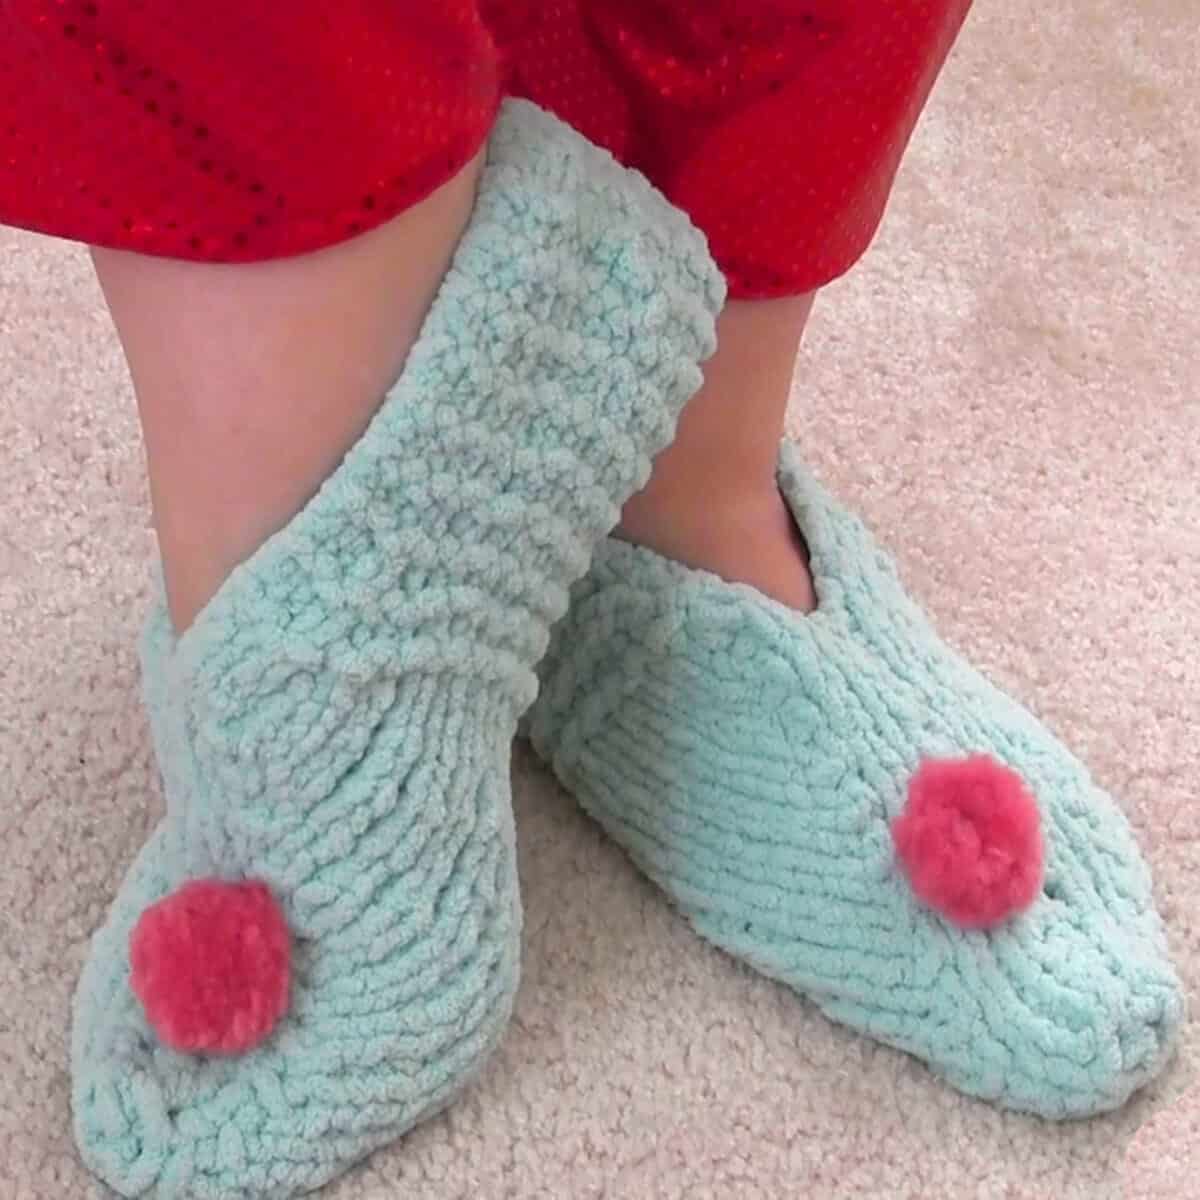 Knitted slippers in light blue yarn color with pink pom poms.